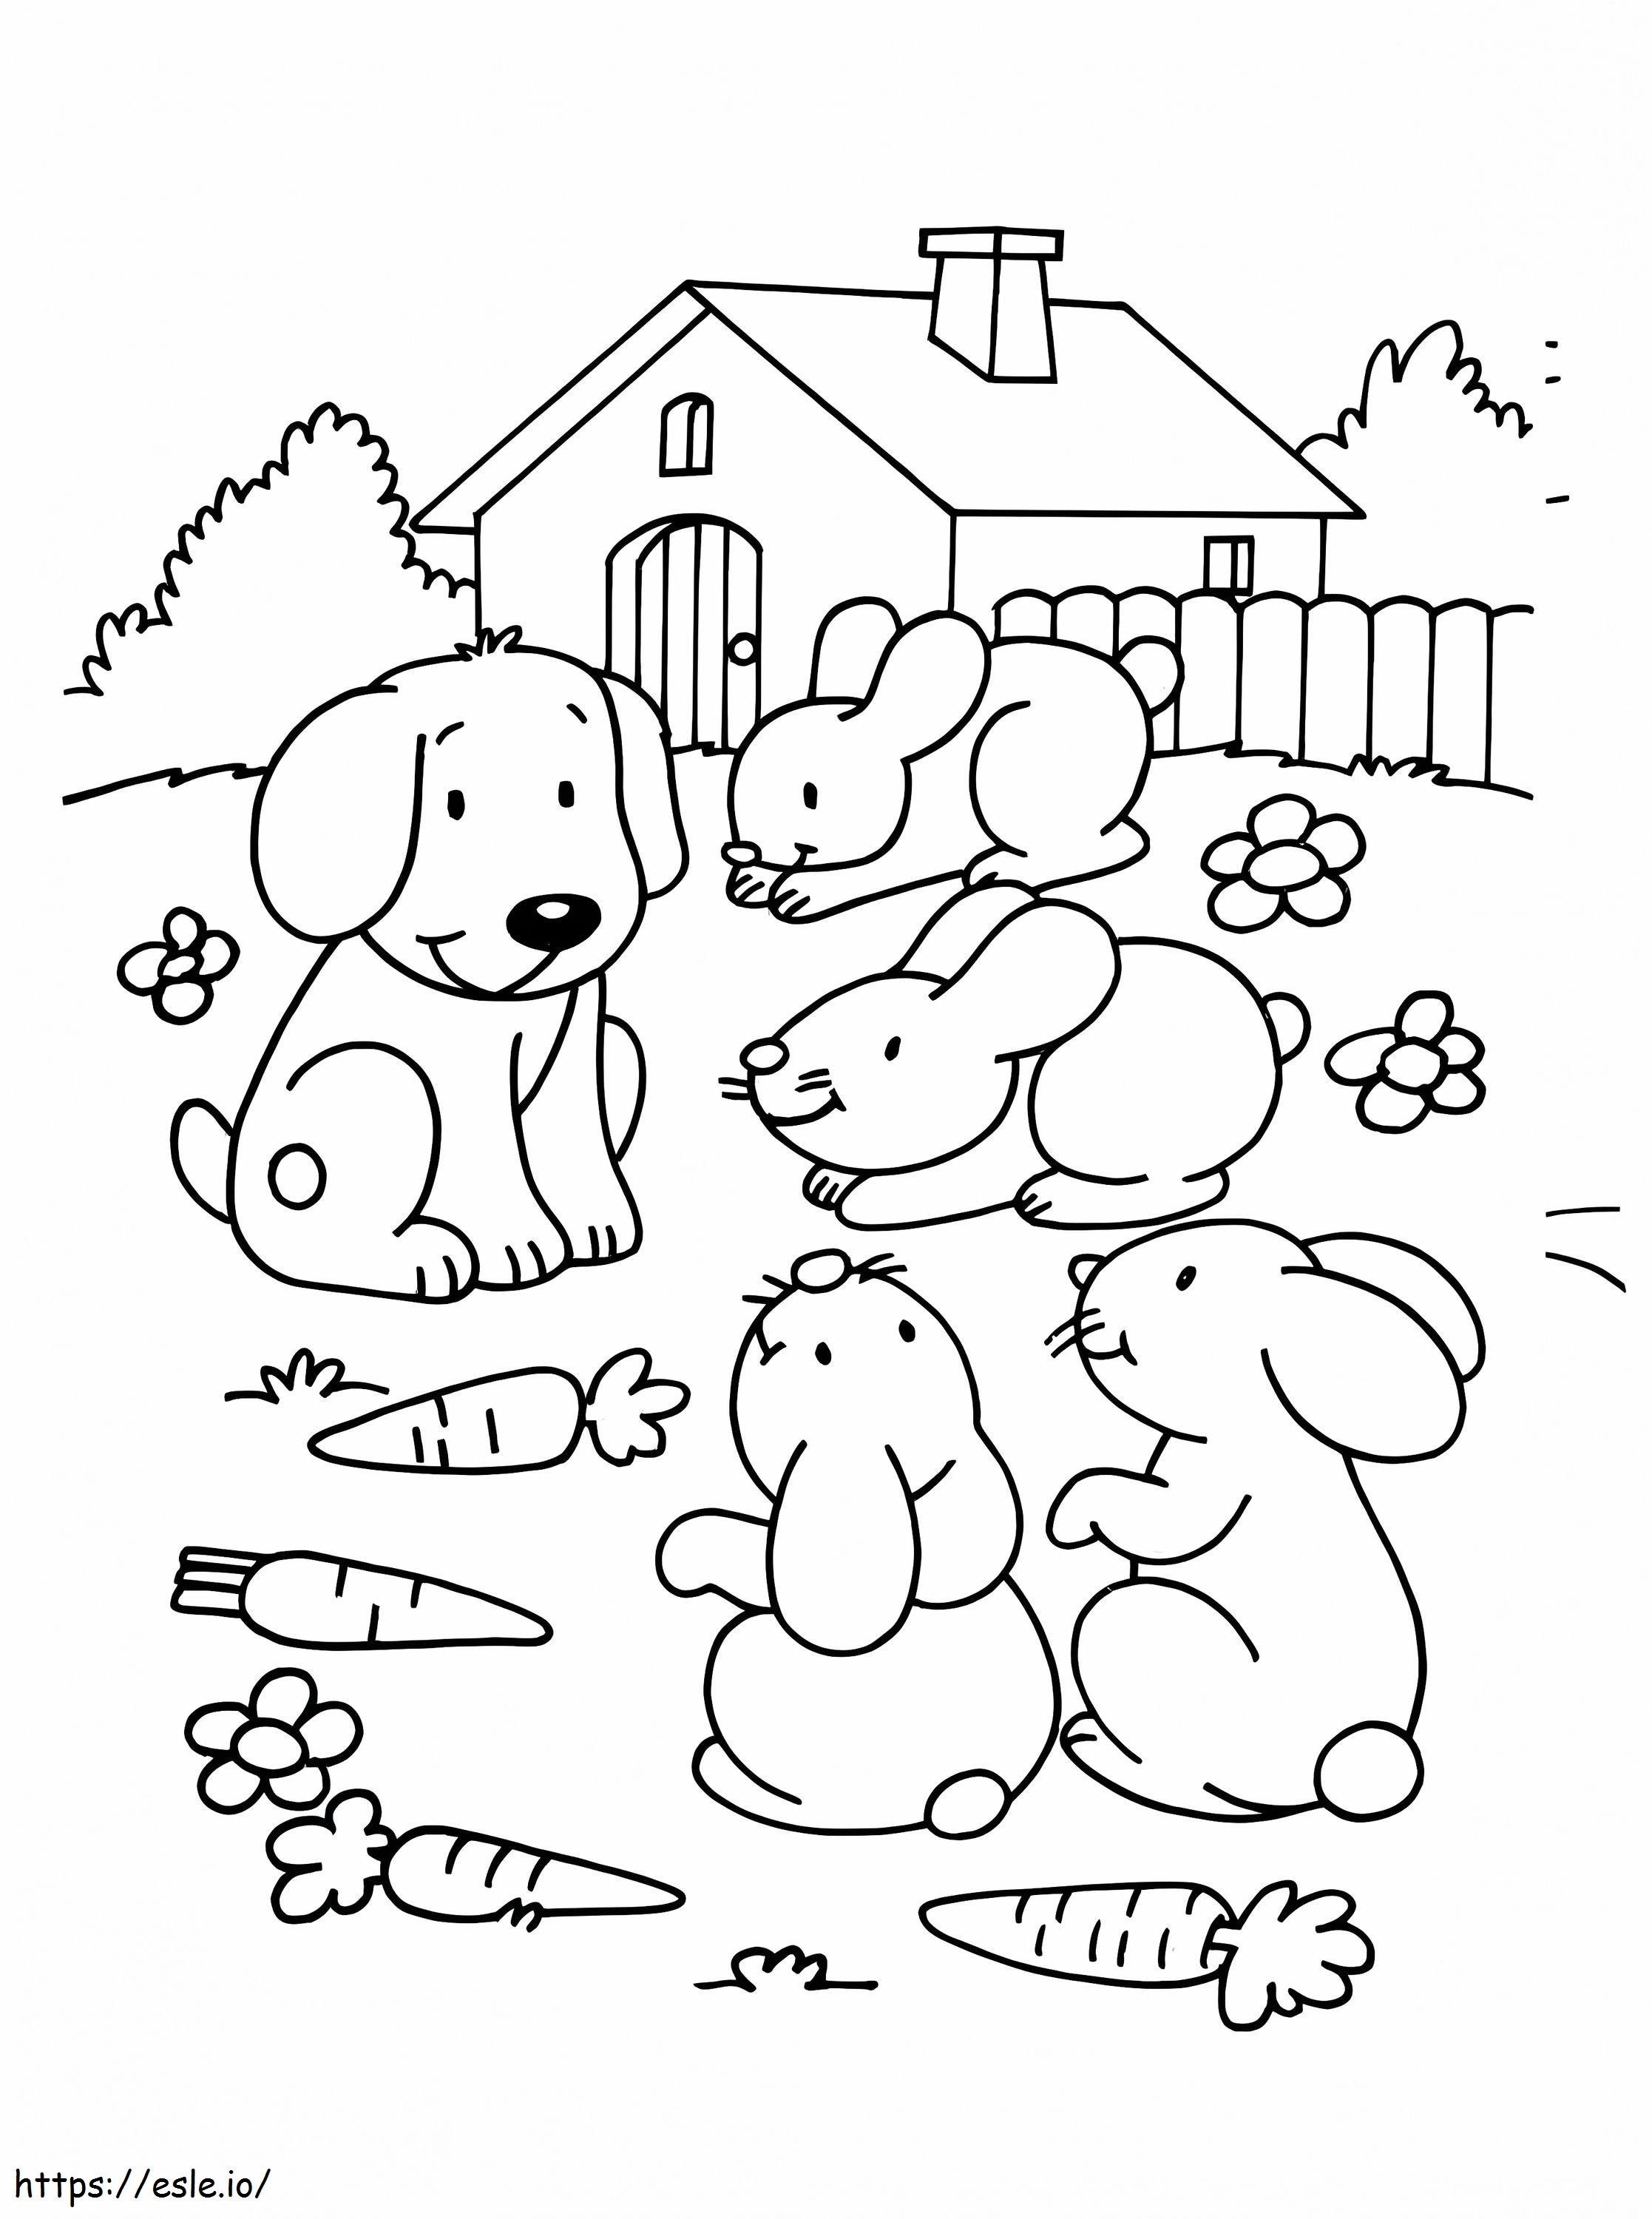 Pets Dogs And Rabbits To Color coloring page